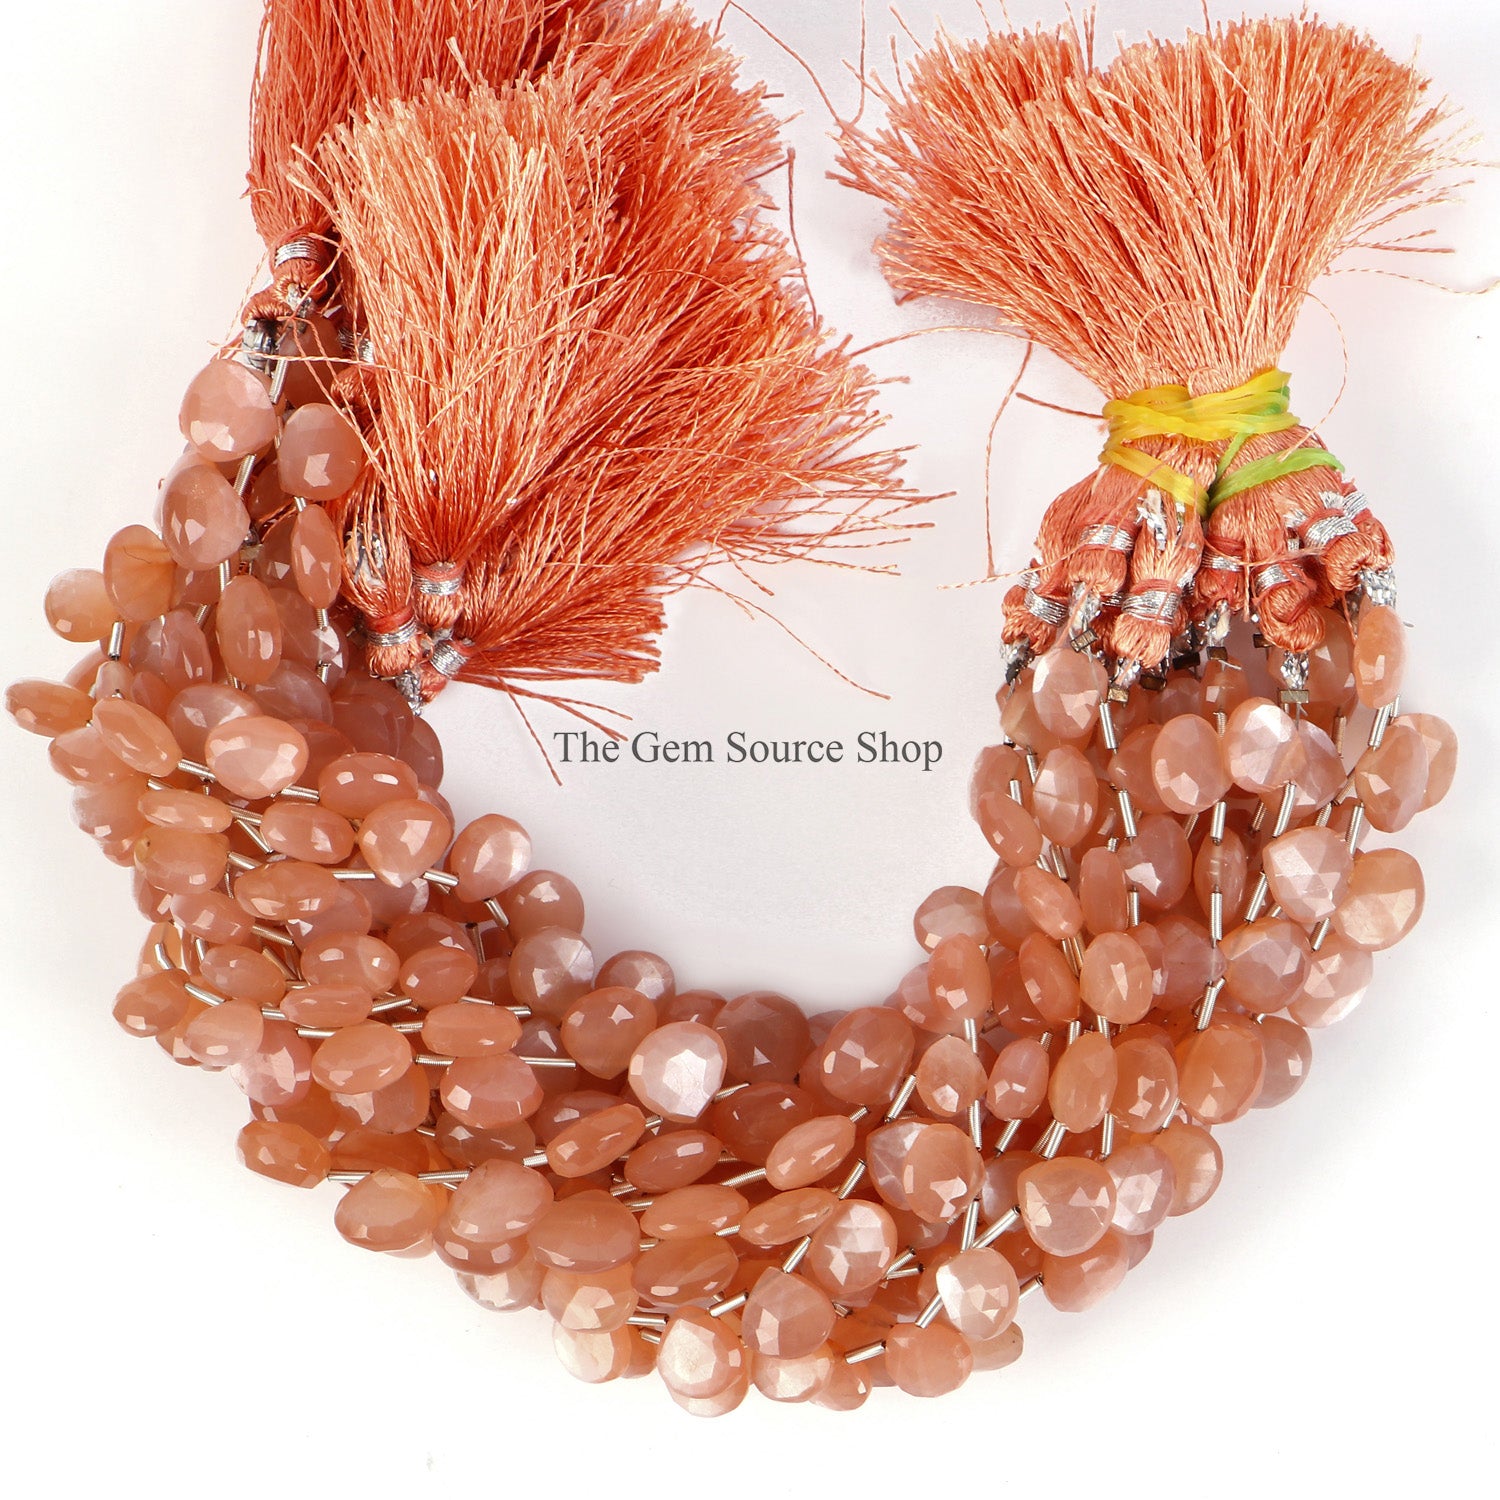 7-10mm Peach Moonstone Beads, Moonstone Faceted Heart Beads, Moonstone Beads For Jewelry